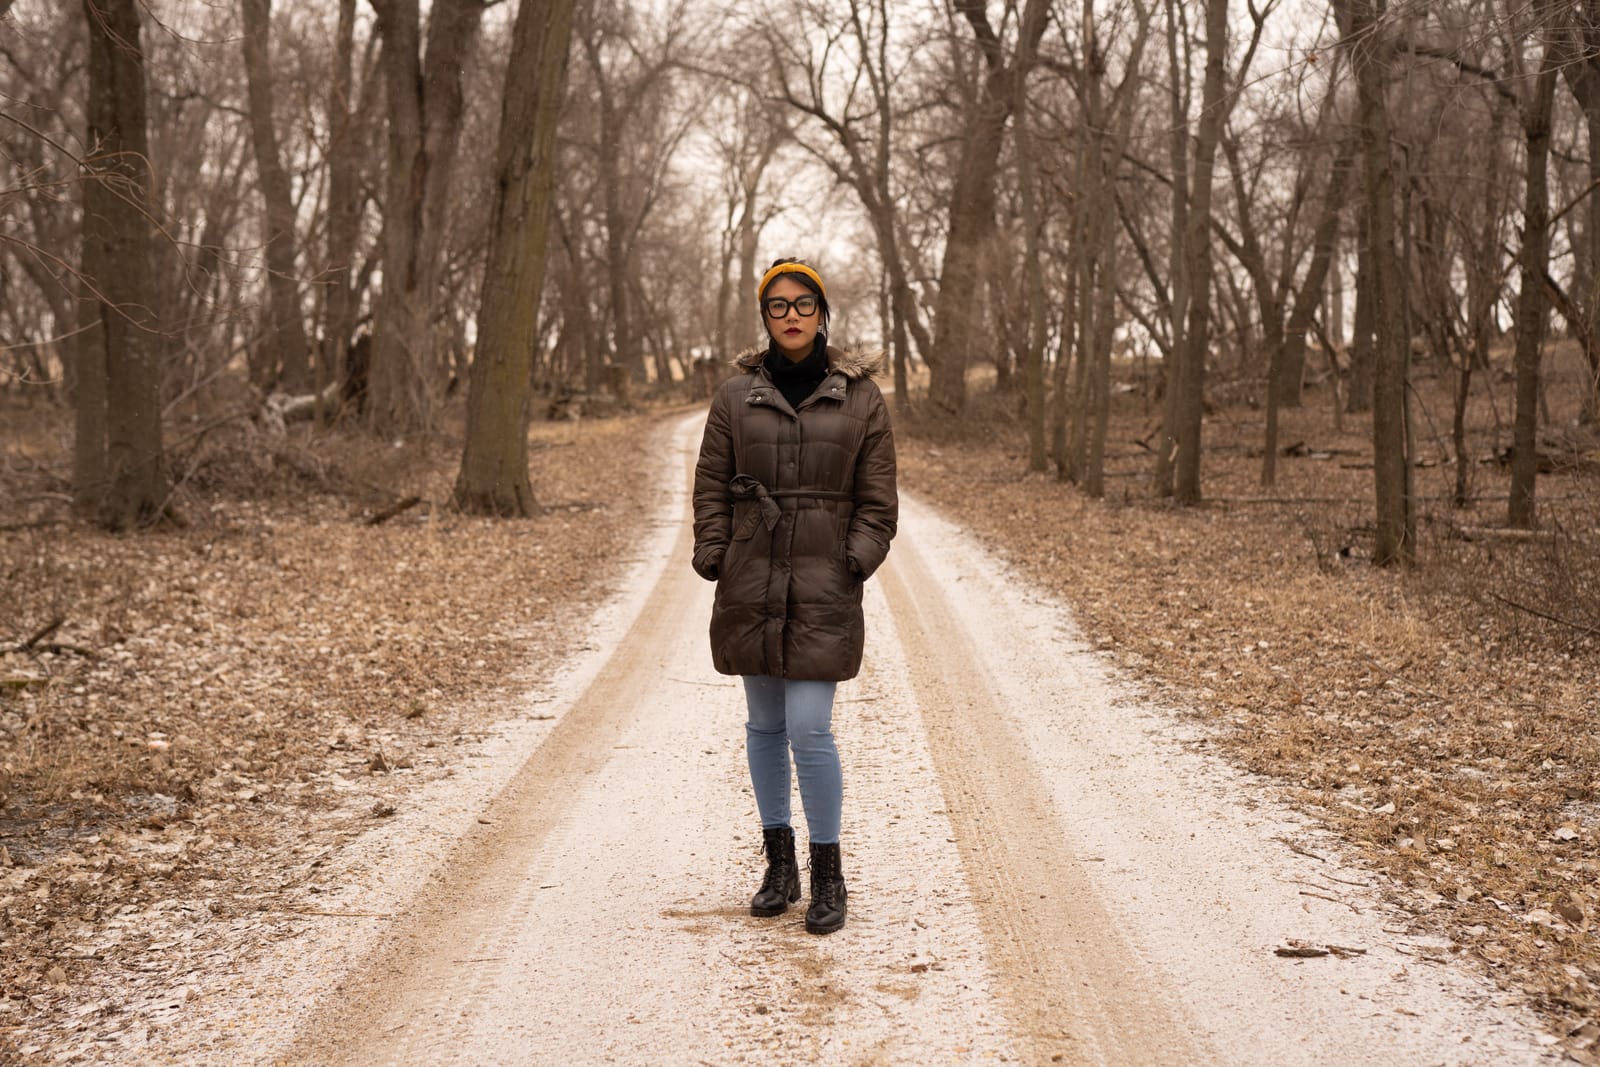 A person wearing a brown jacket stands in the center of a dirt road lightly dusted with snow. They are surrounded by a forest of leafless trees.